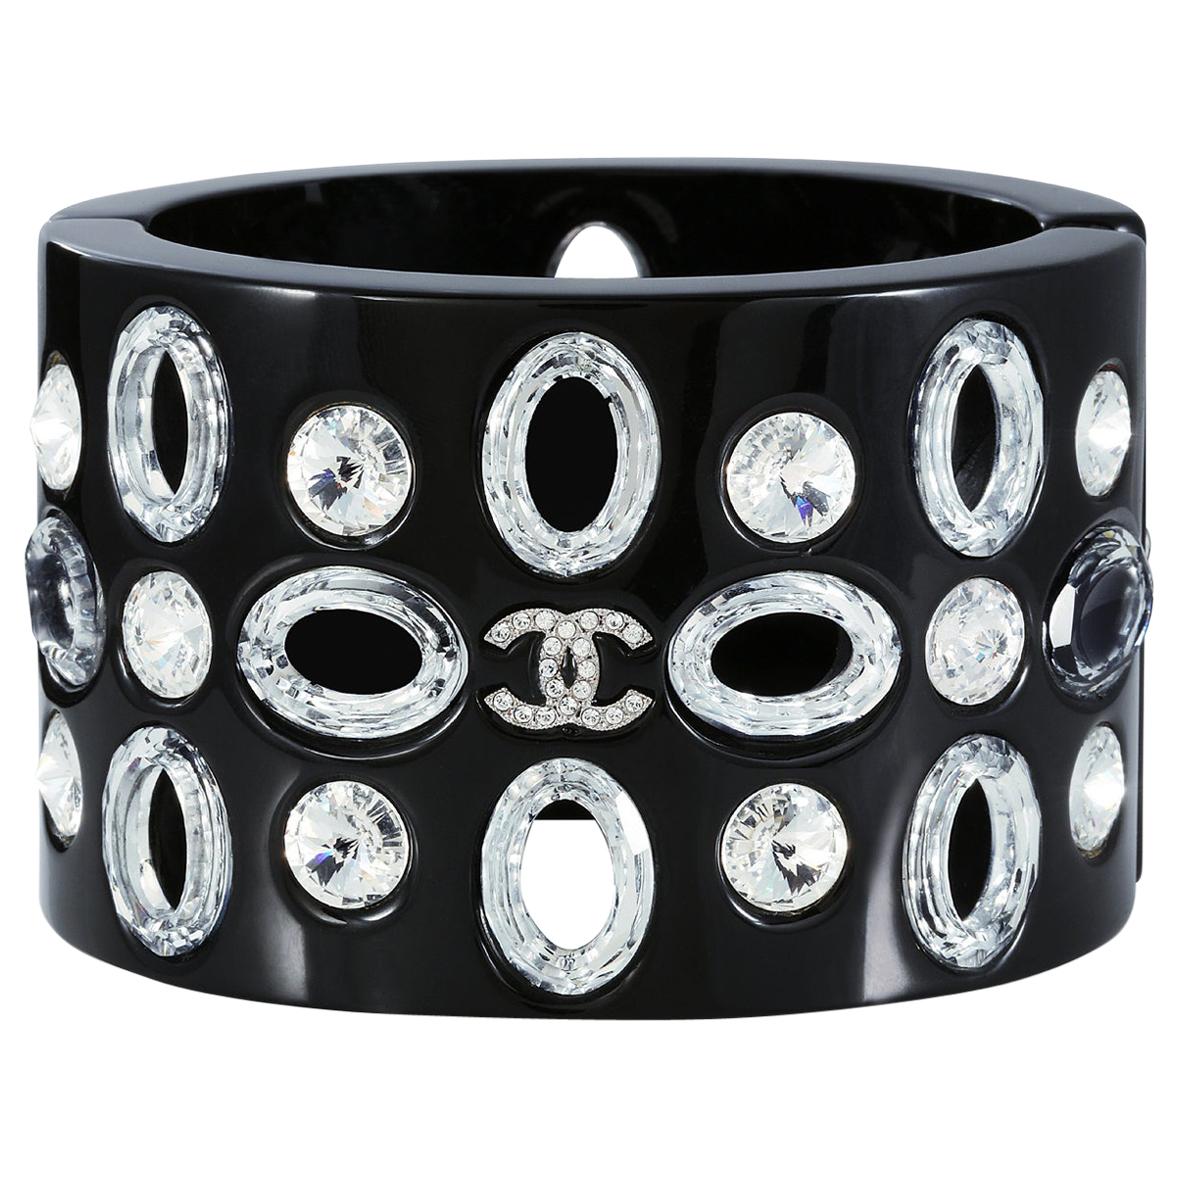 Chanel Black Resin and Crystal Hinged Cuff